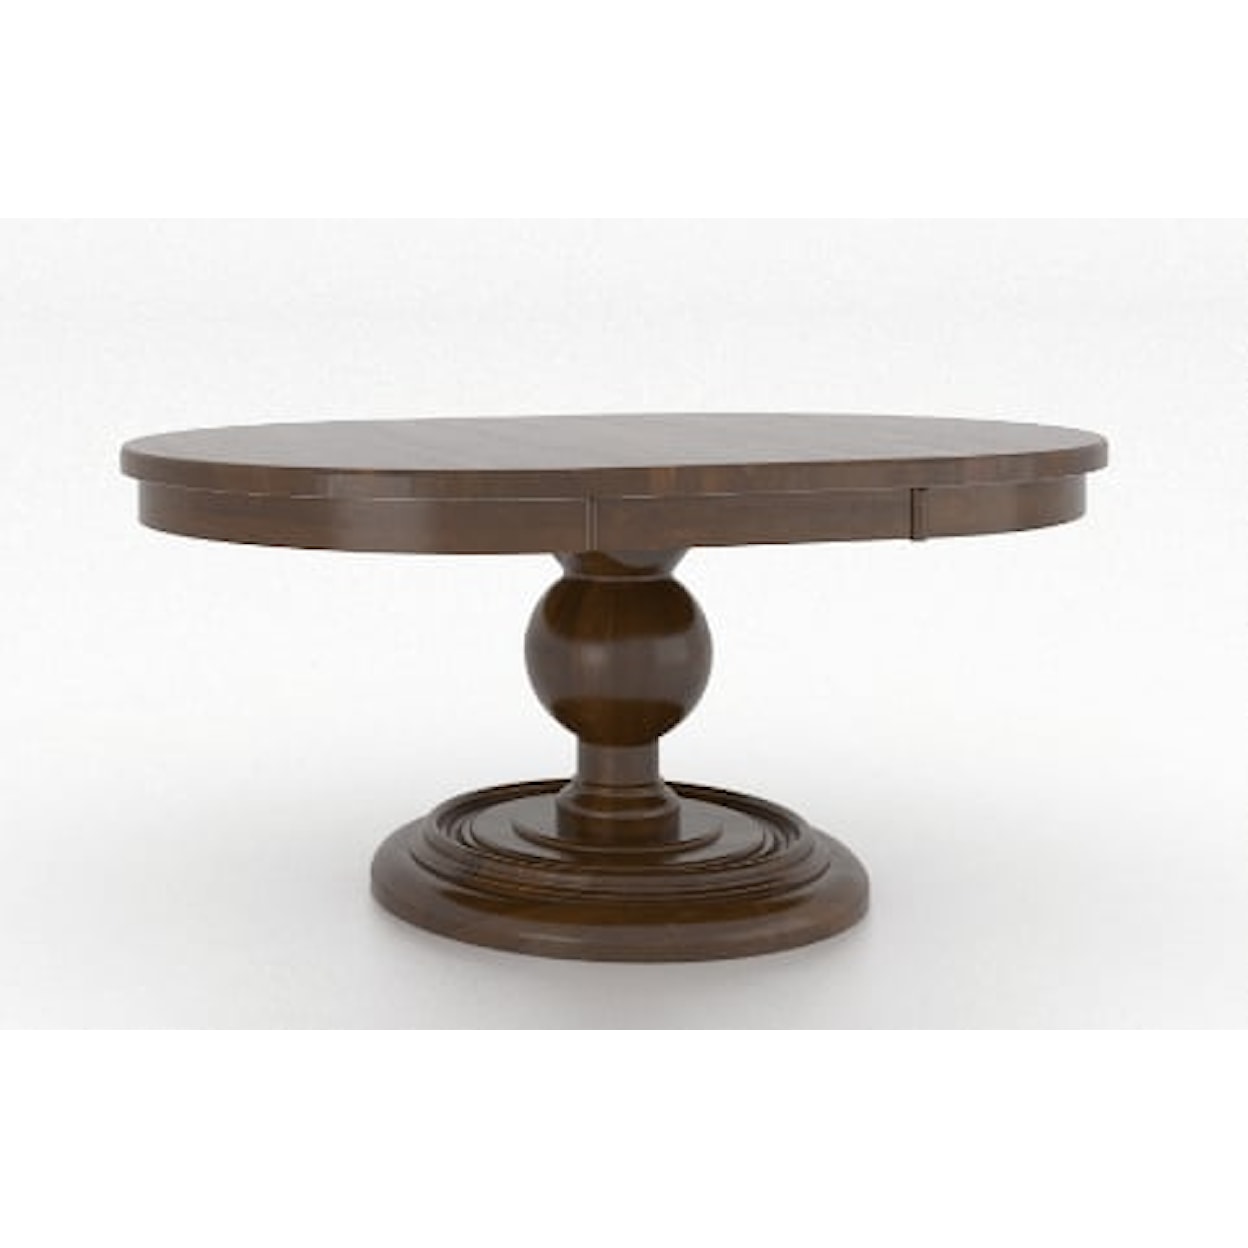 Canadel Canadel Round Oval Table